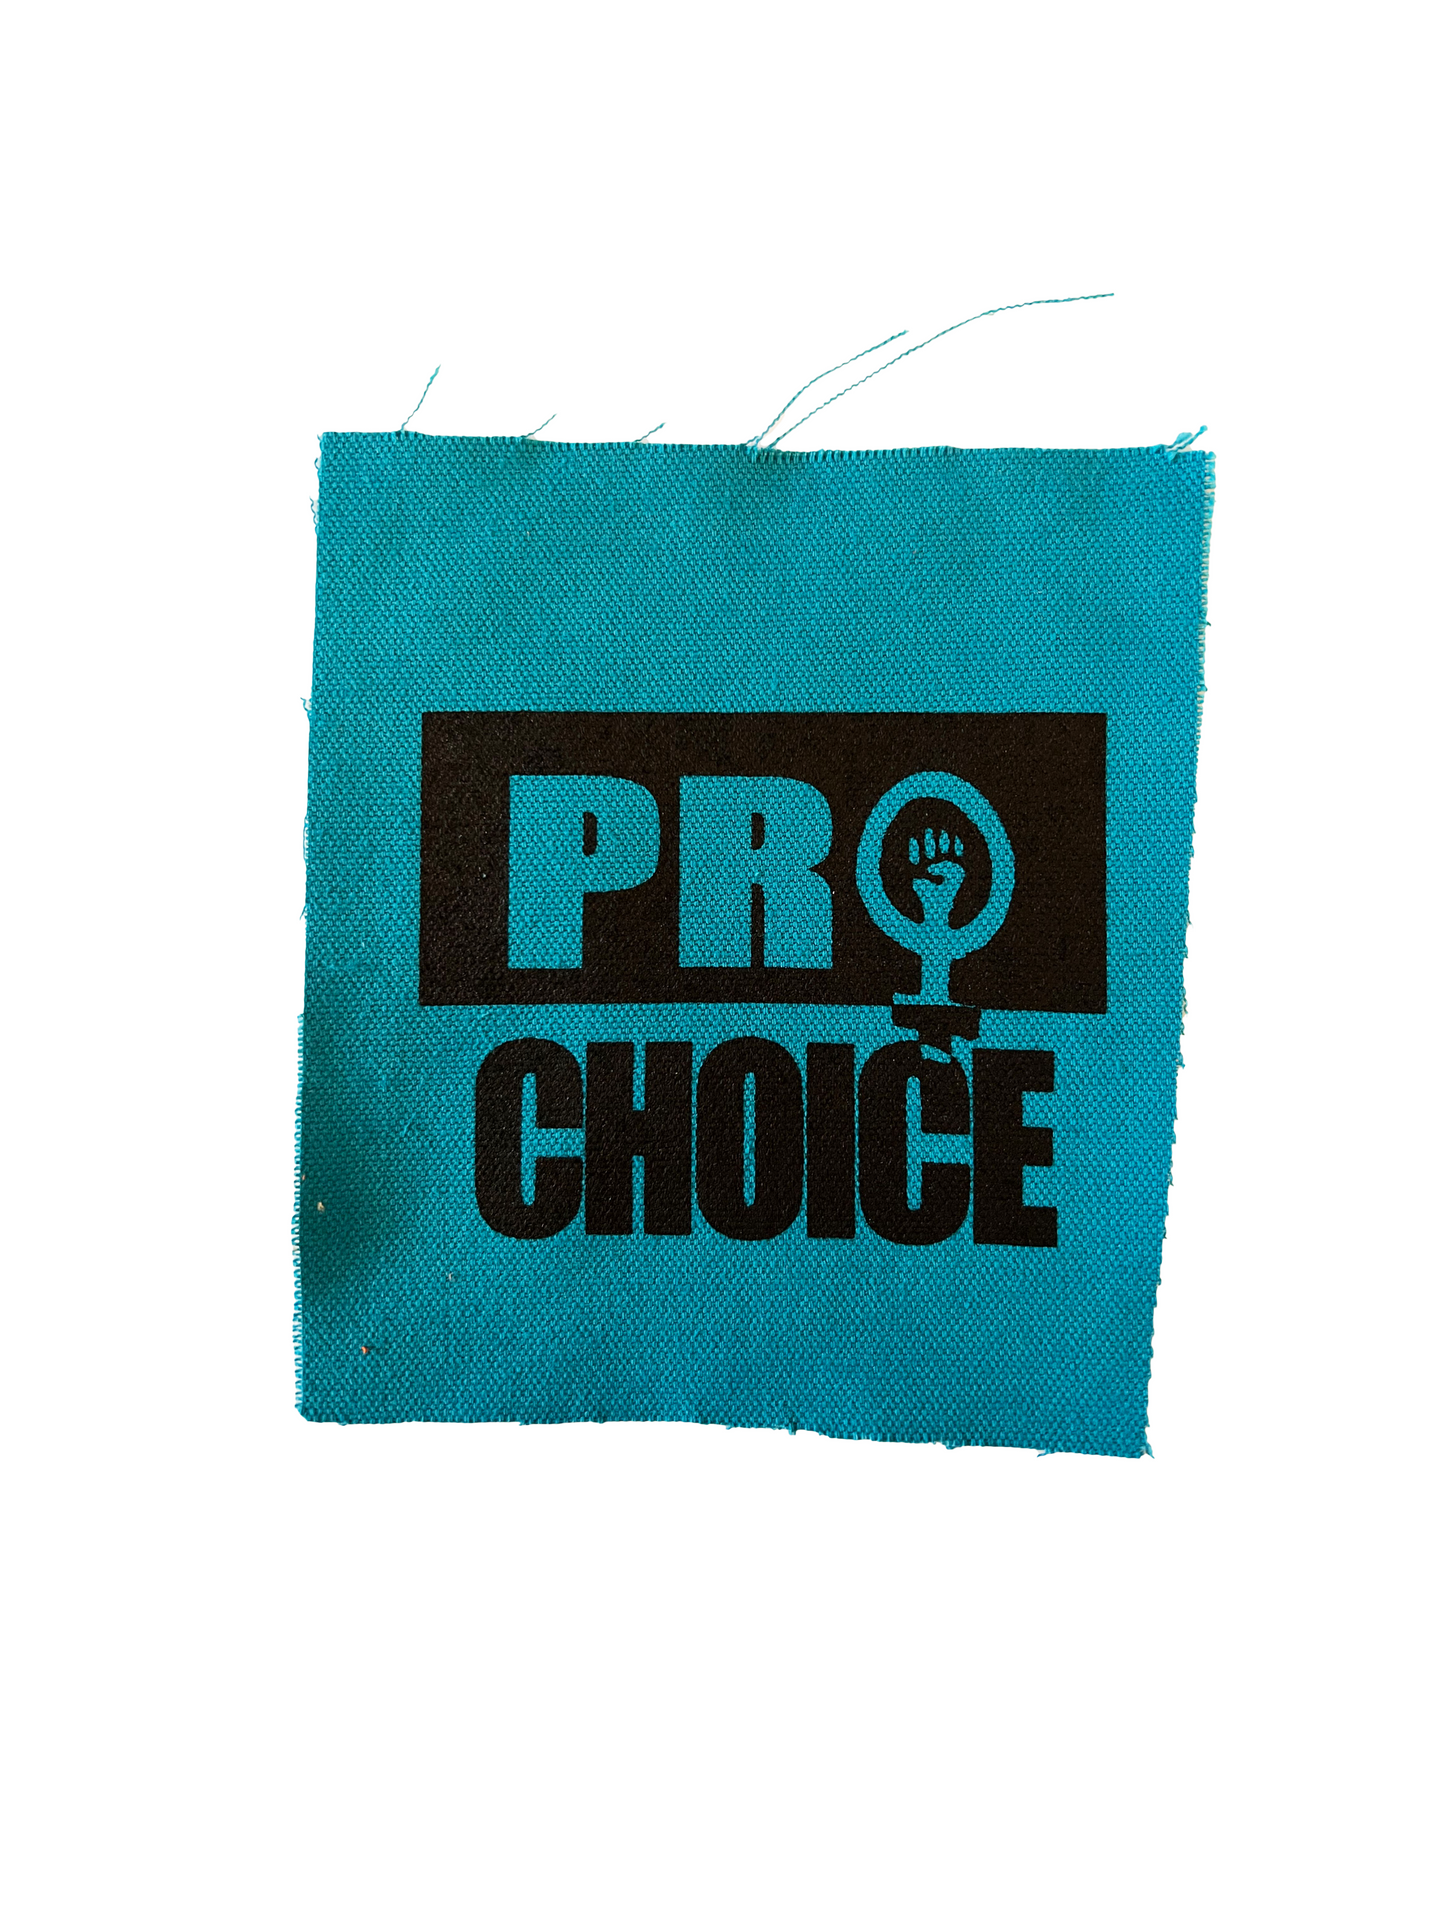 Microcosm Pro Choice Patch in Teal